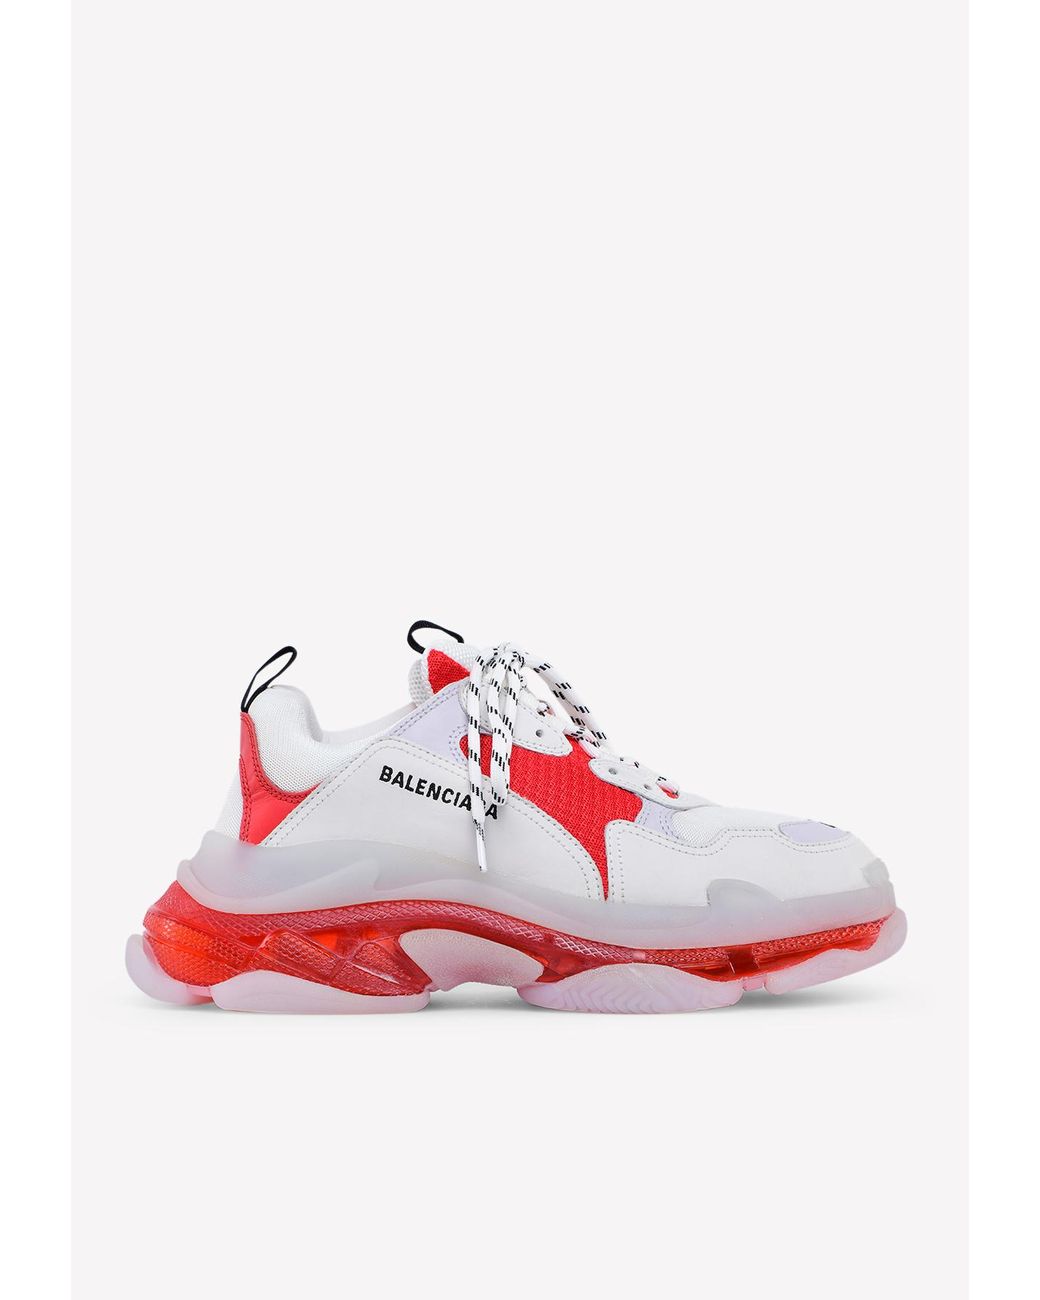 Balenciaga Triple S Sneakers In Mesh And Leather in Red for Men | Lyst